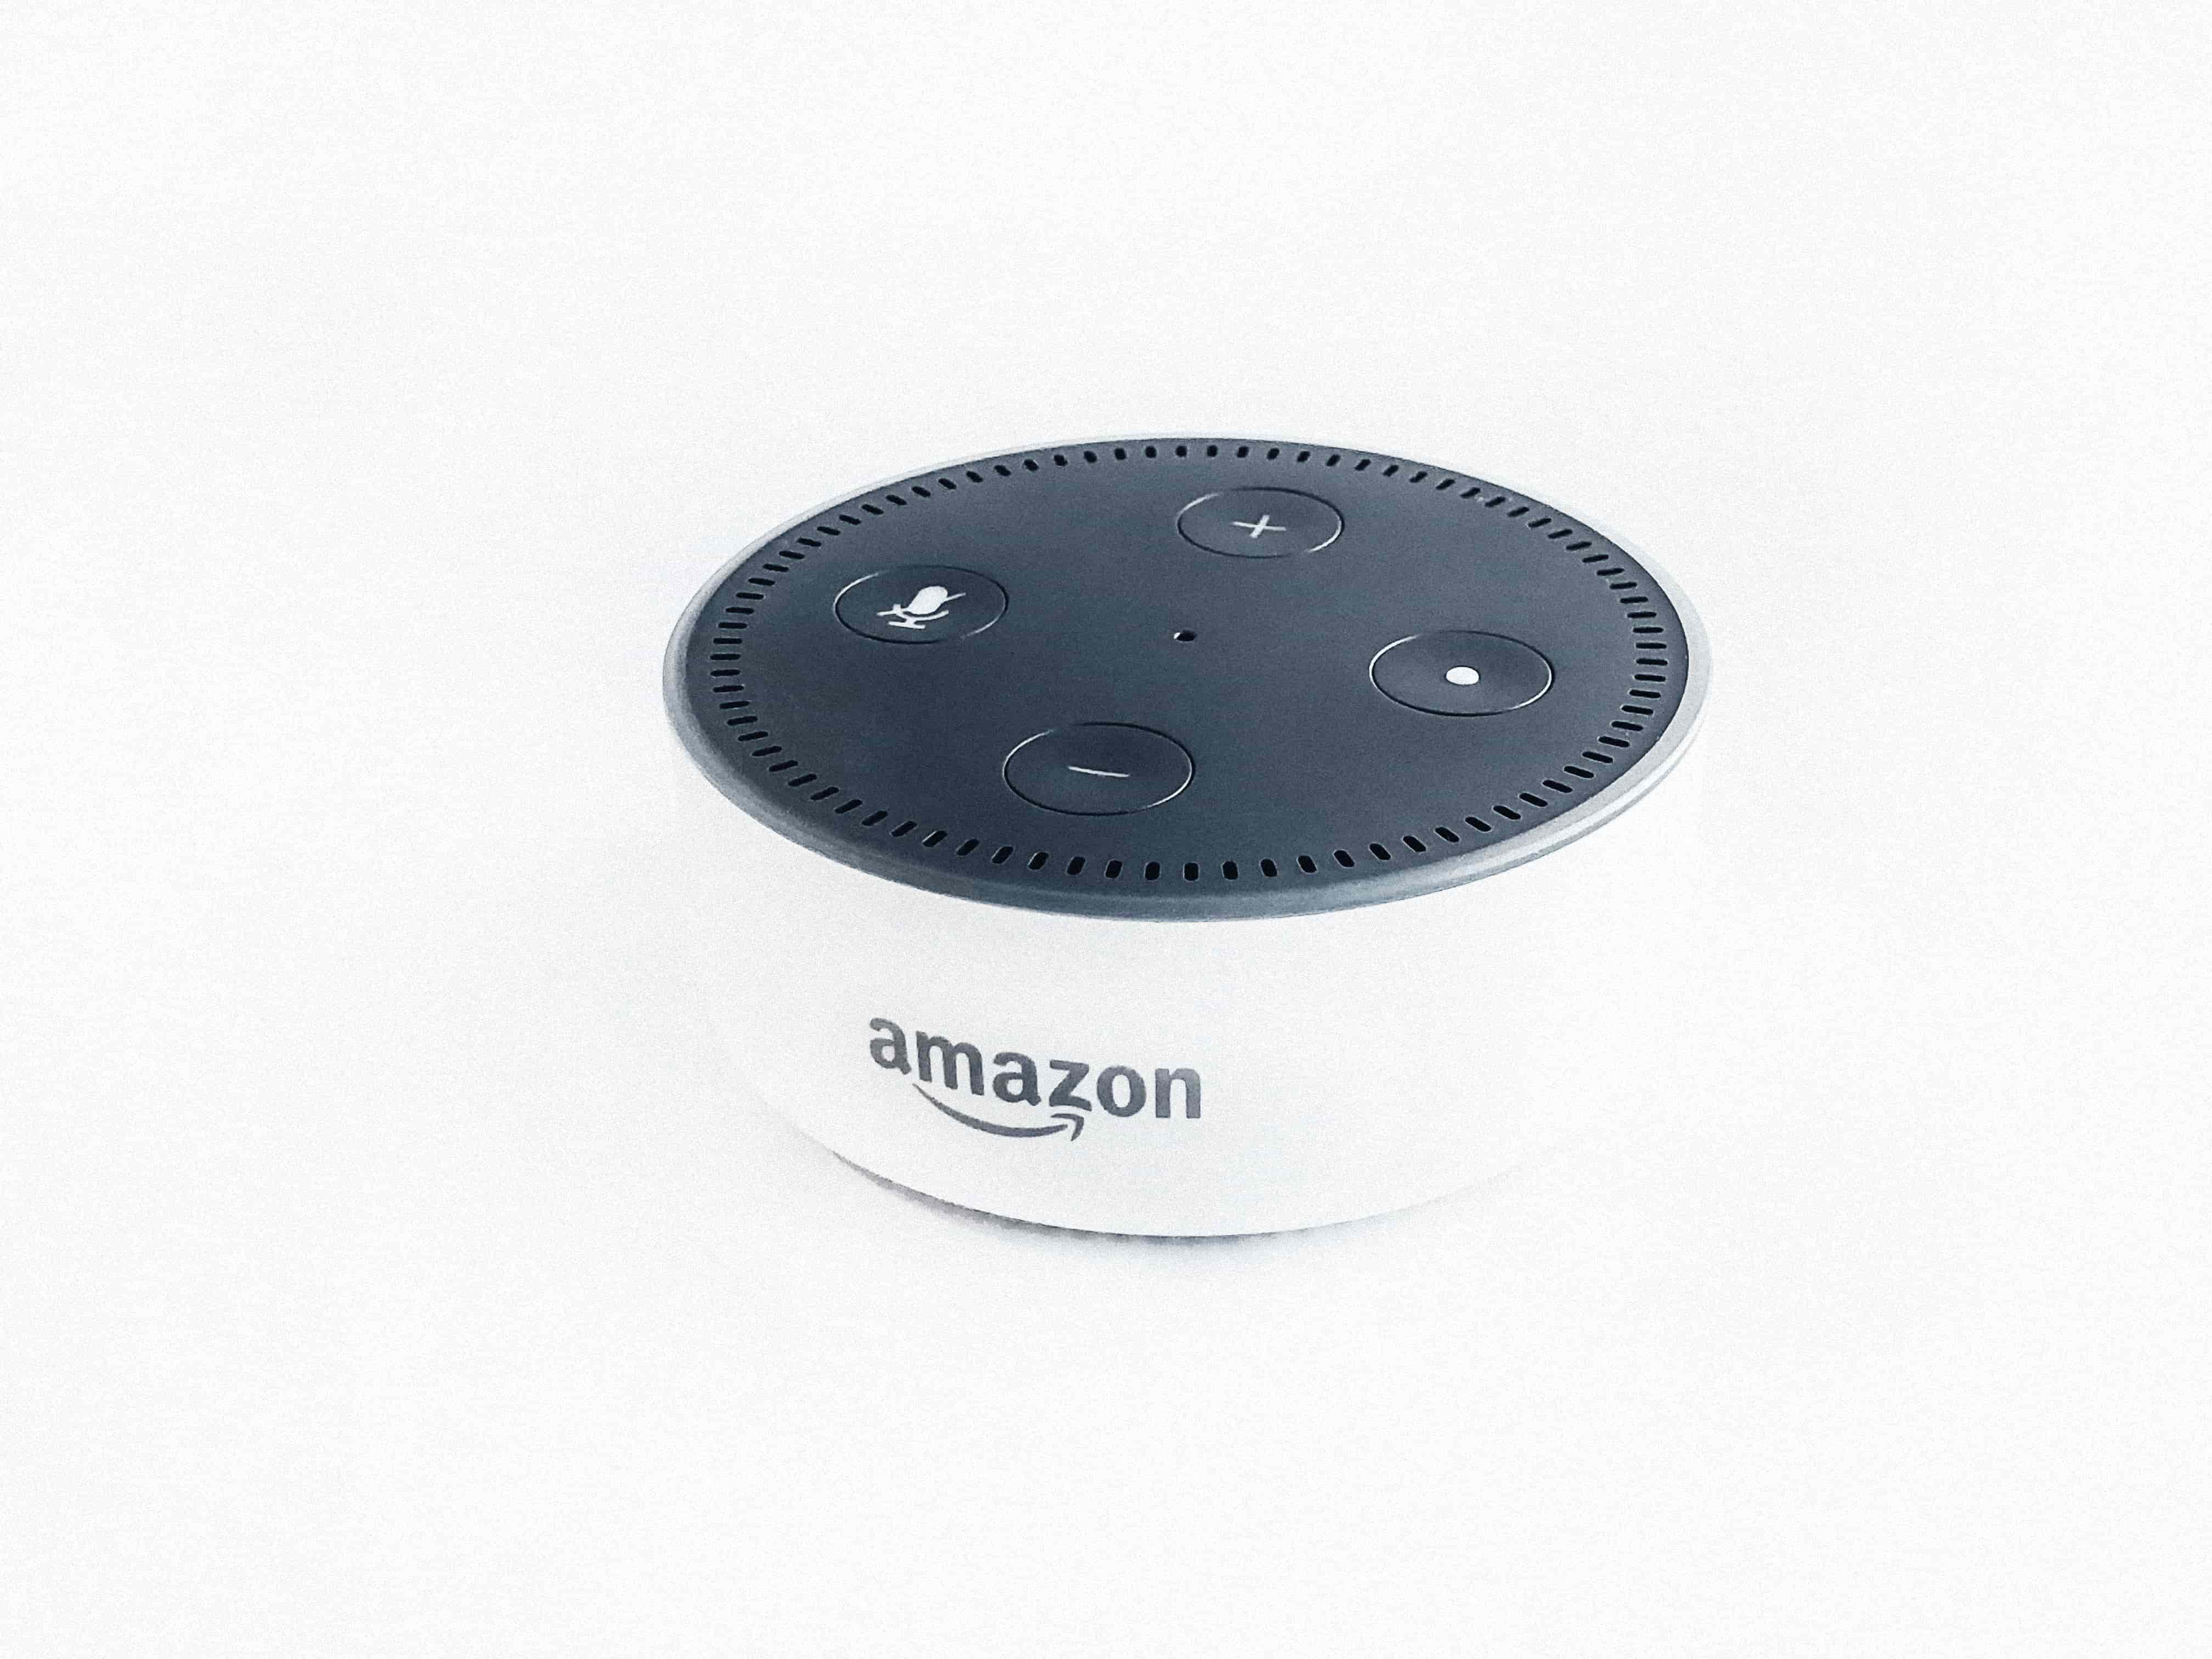 amazon's echo: august 2019 real estate news